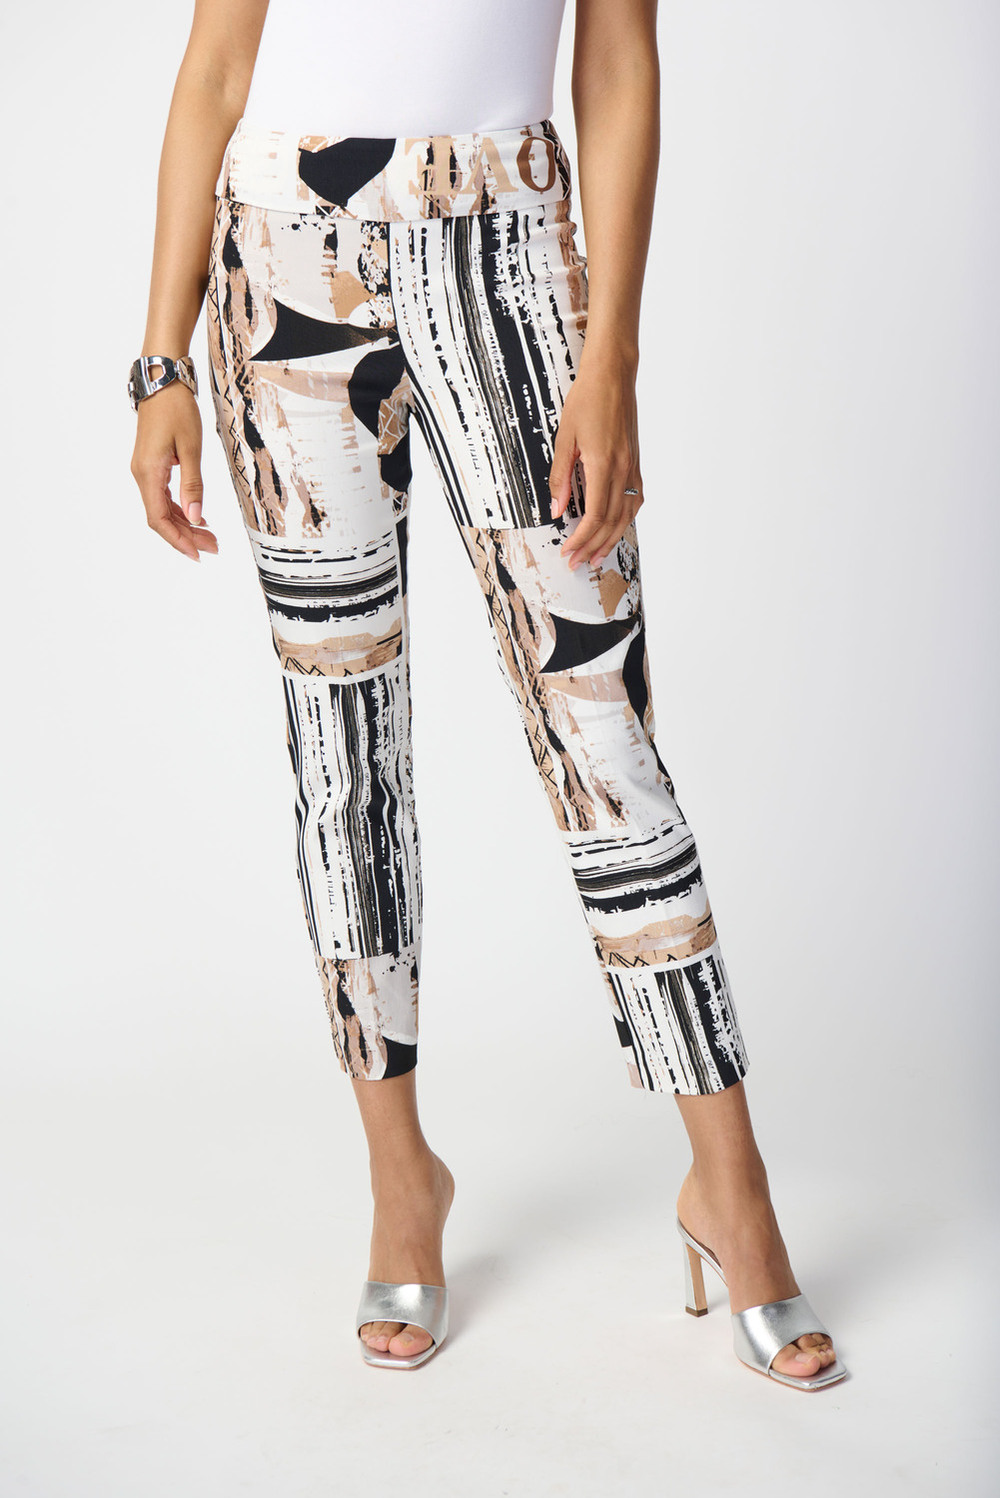 Abstract Print Cropped Pants Style 241265. Vanilla/multi